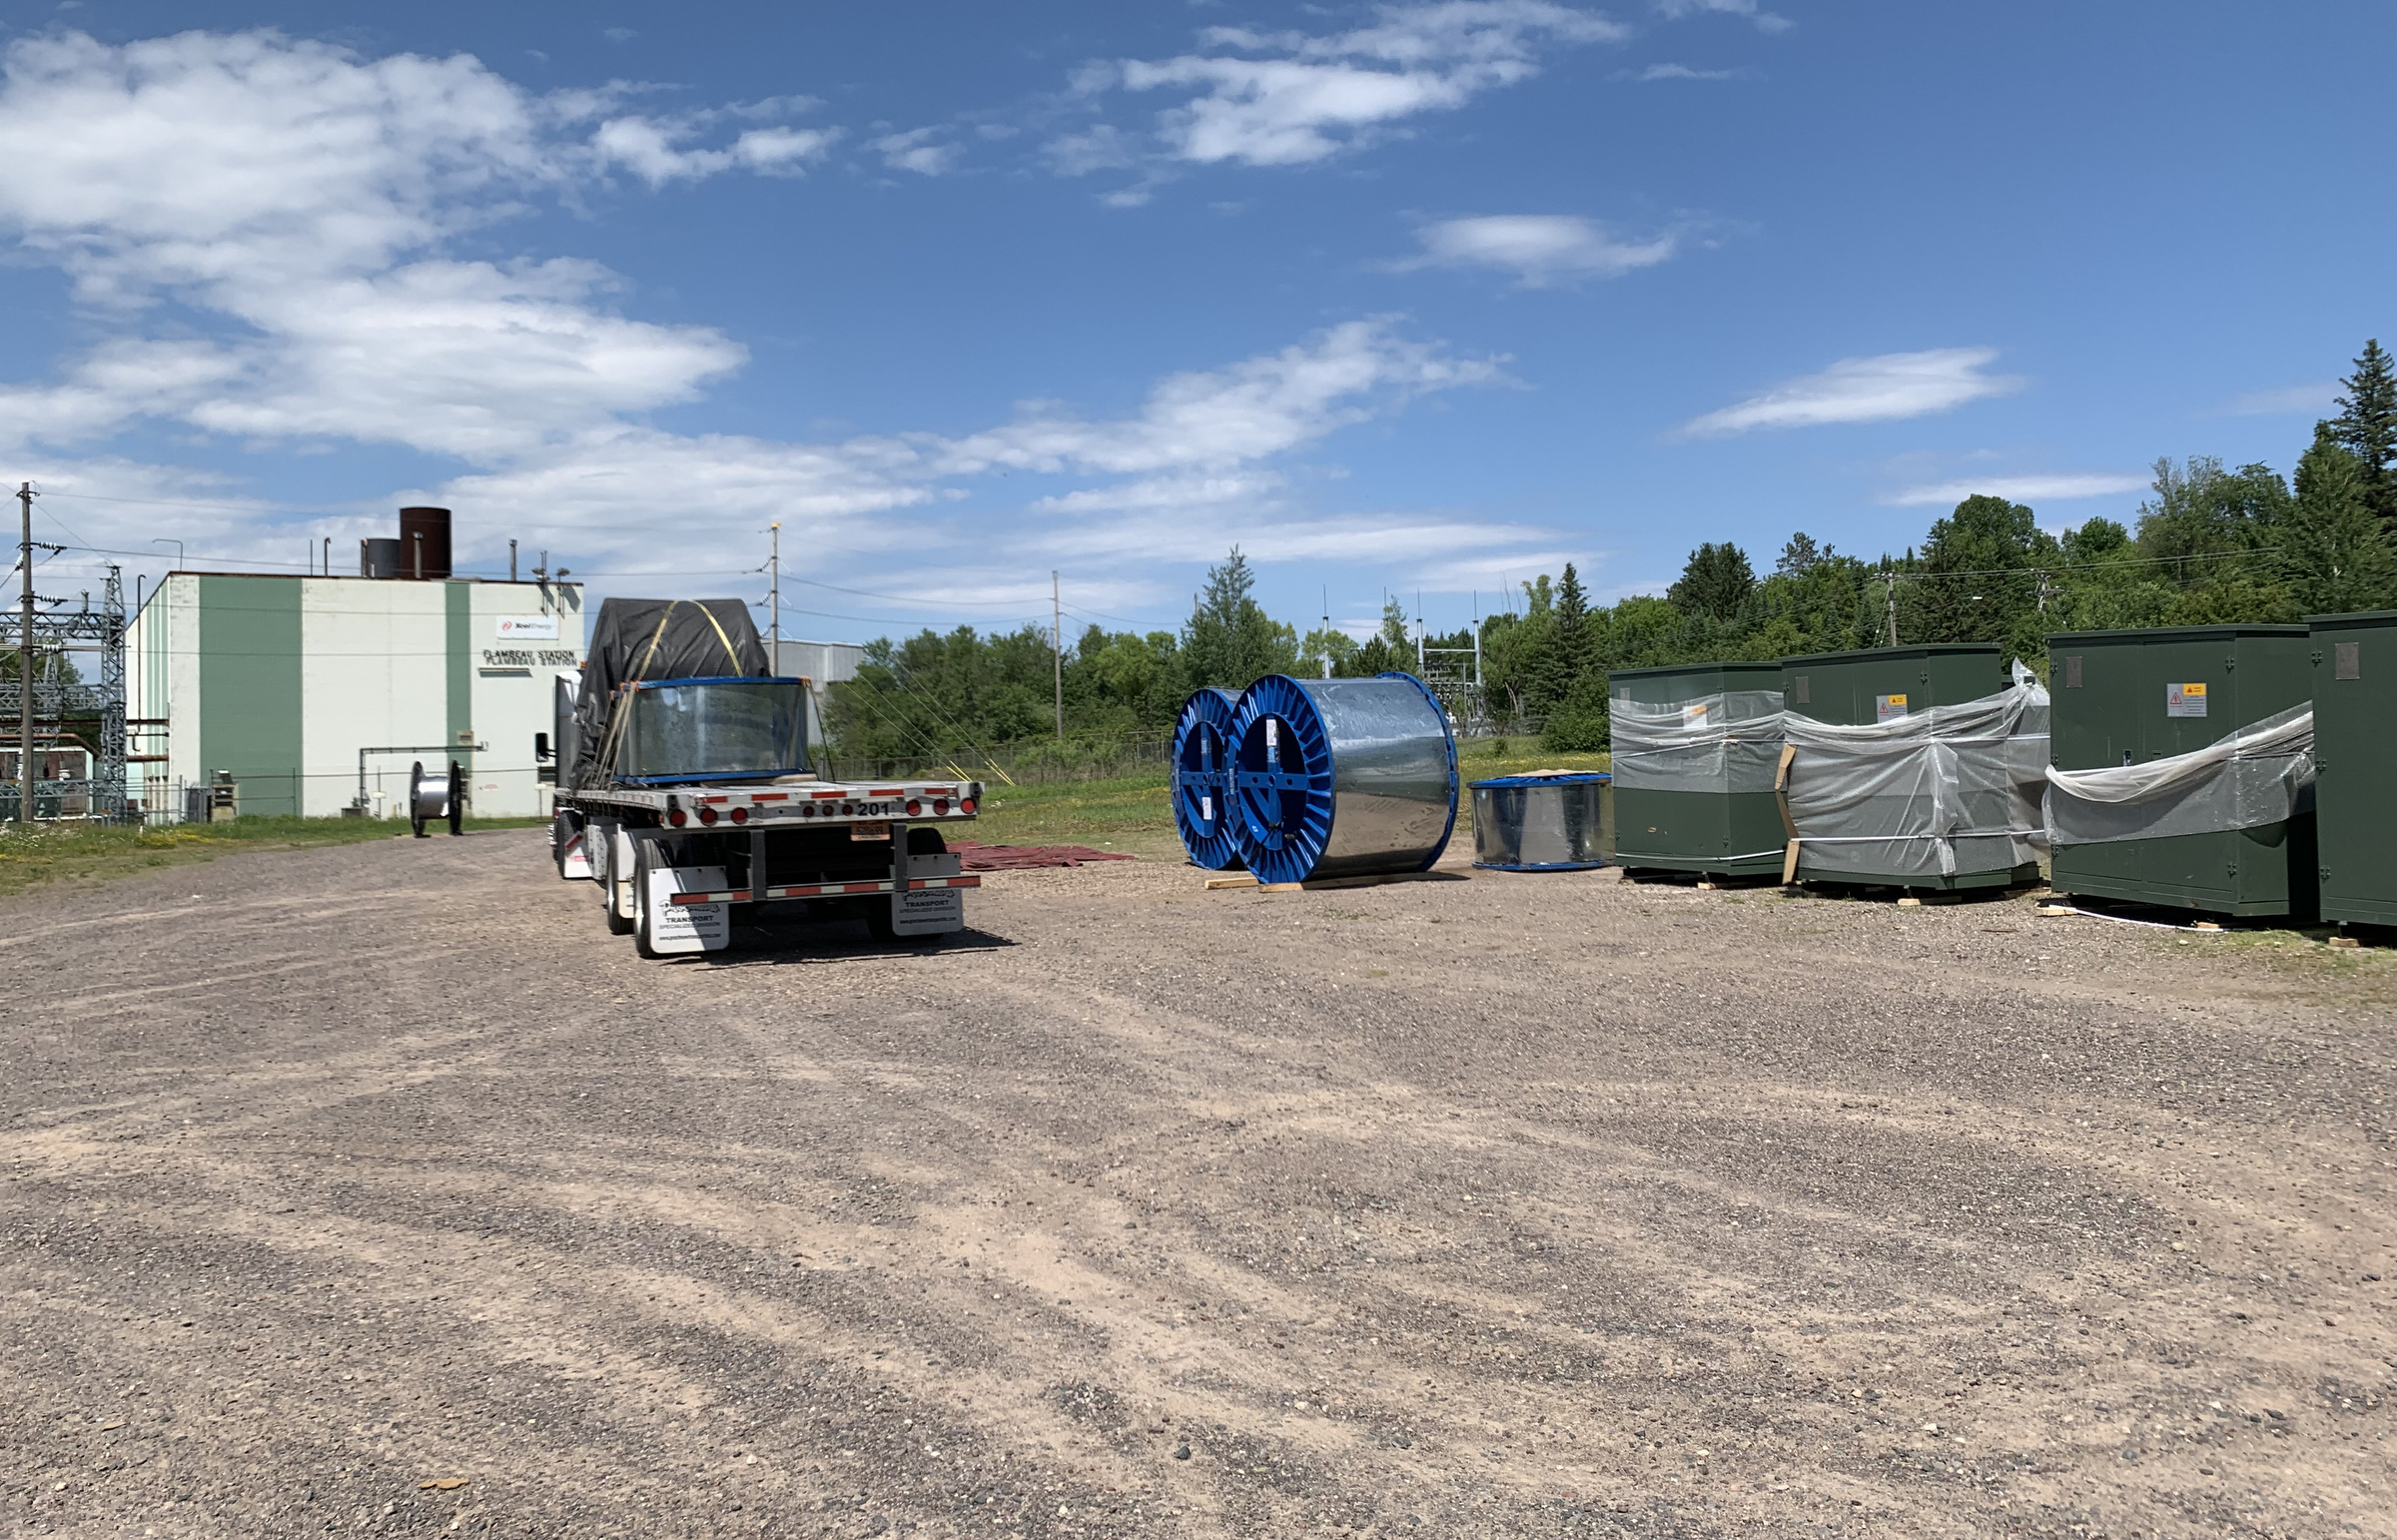 An empty semi truck is parked near some large equipment next to a shed on gravel